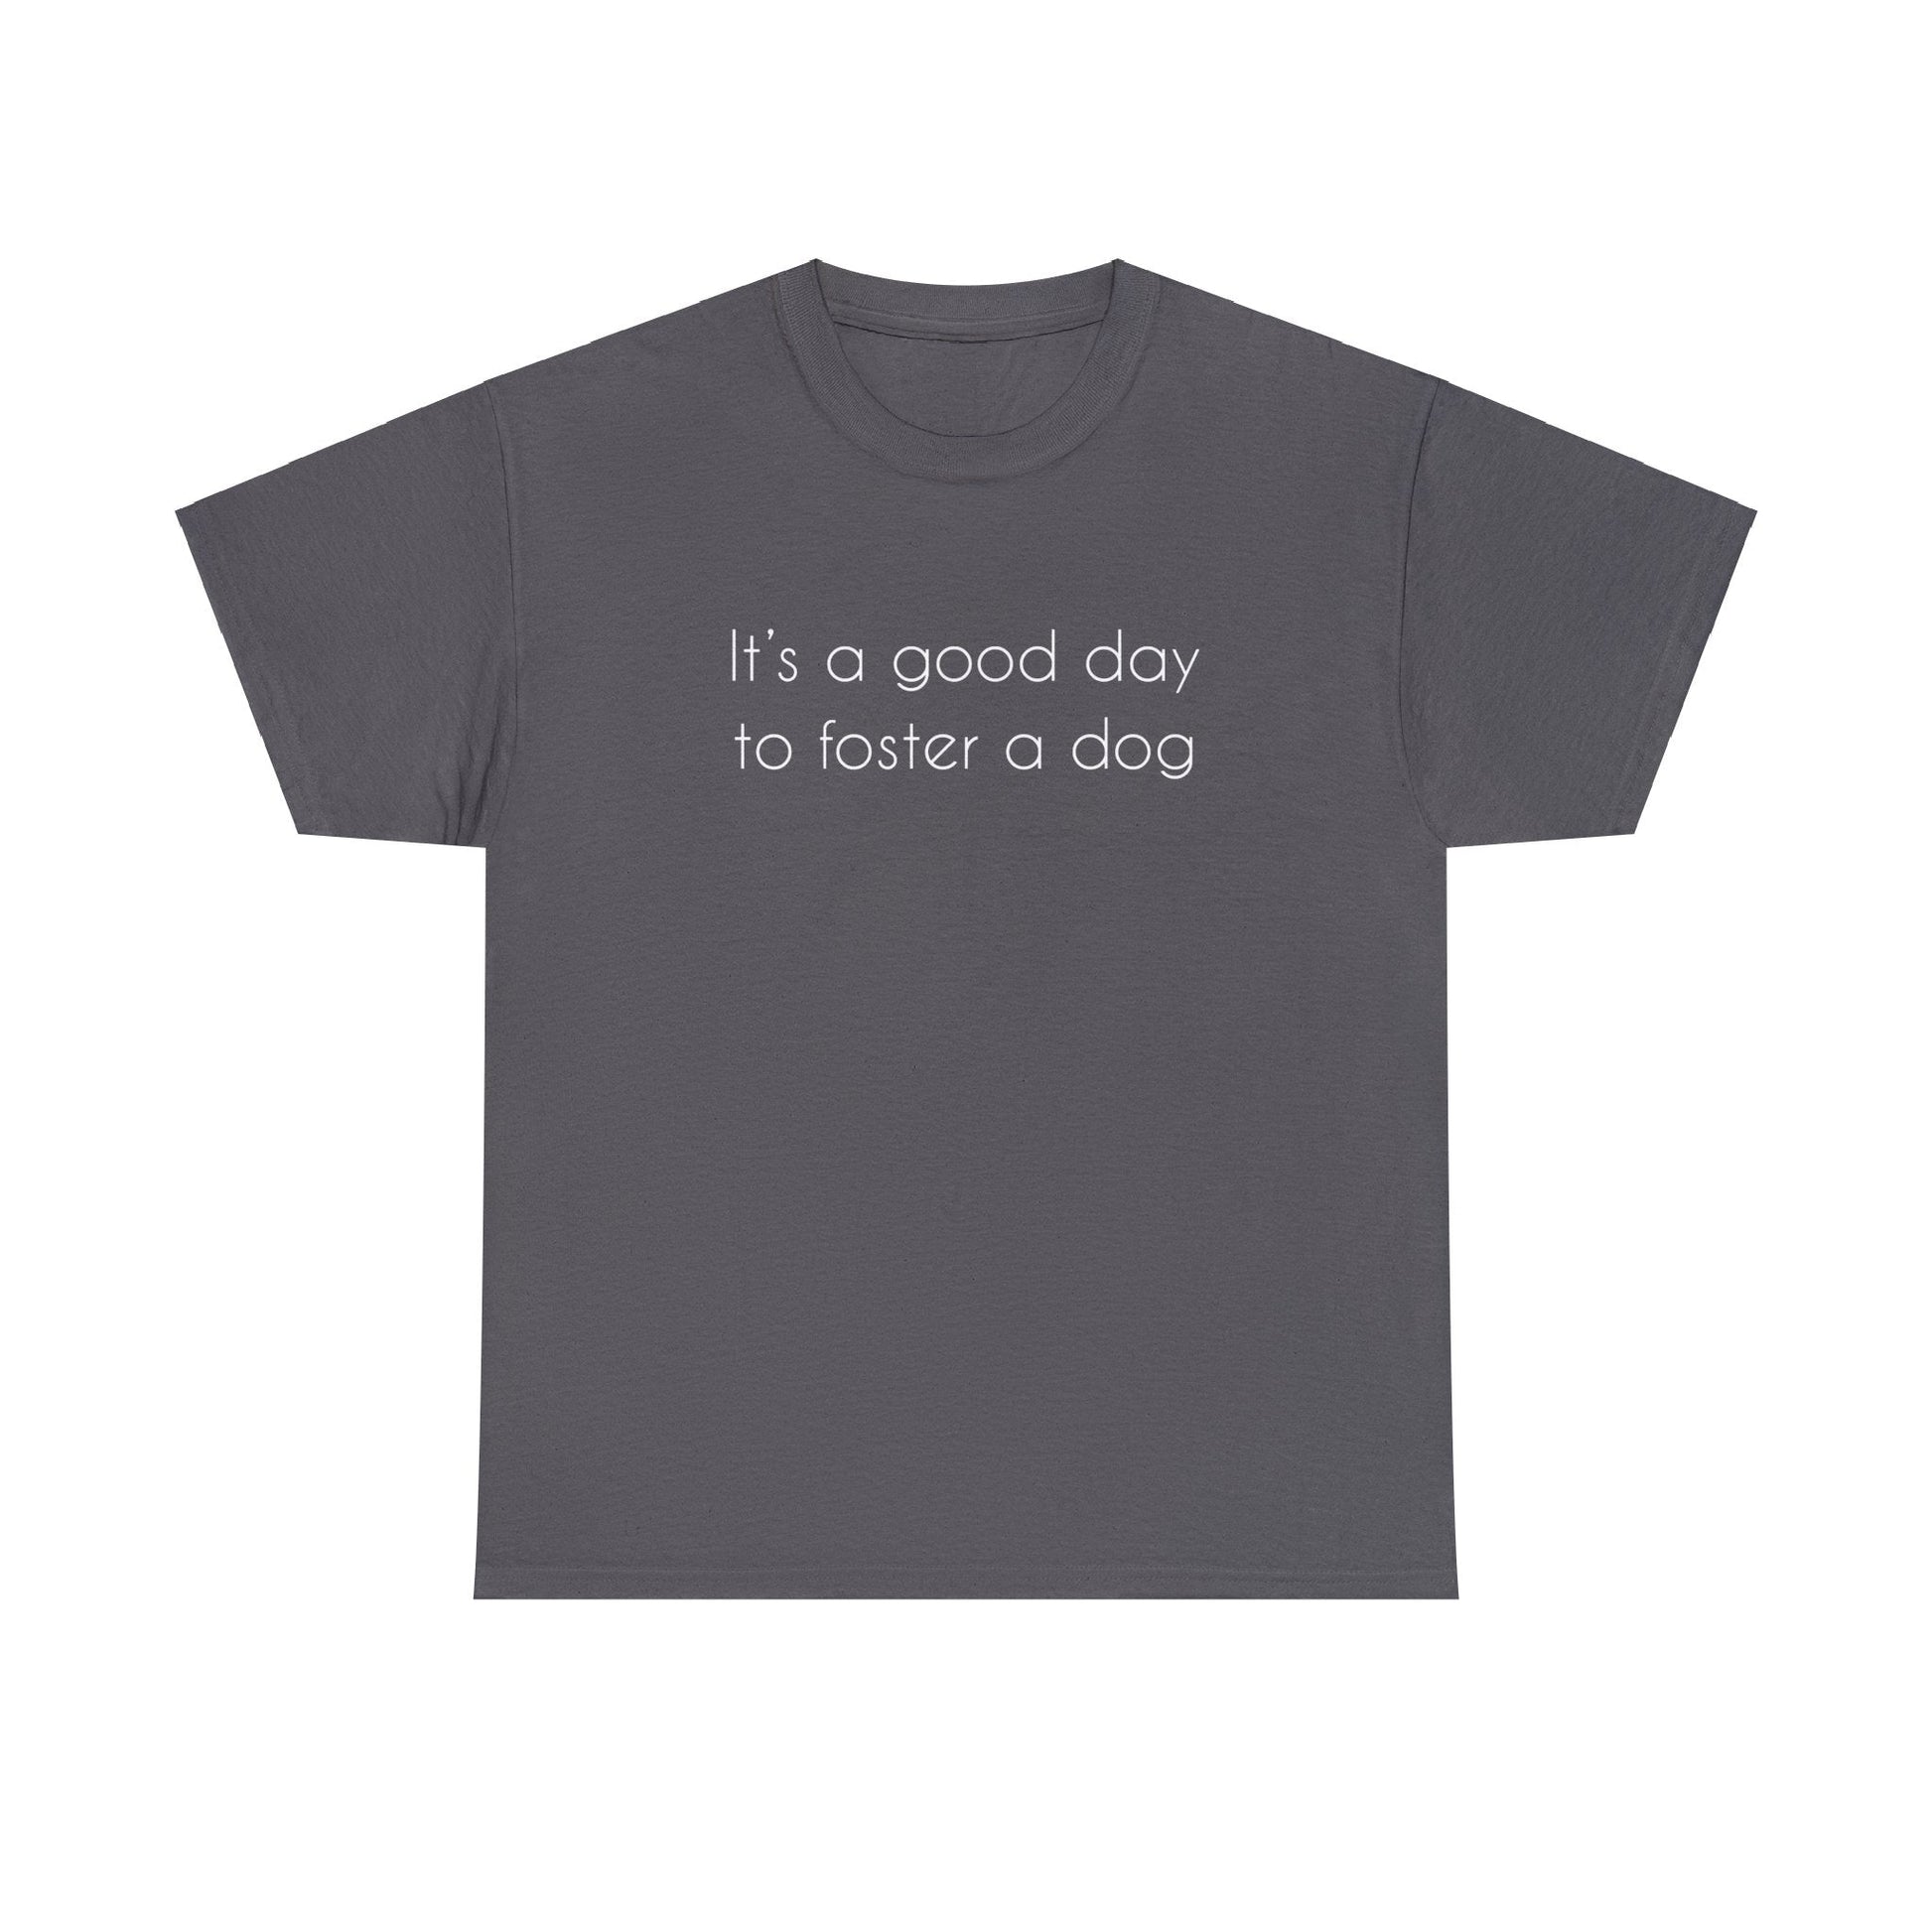 It's A Good Day To Foster A Dog | Text Tees - Detezi Designs-10497951681739573665